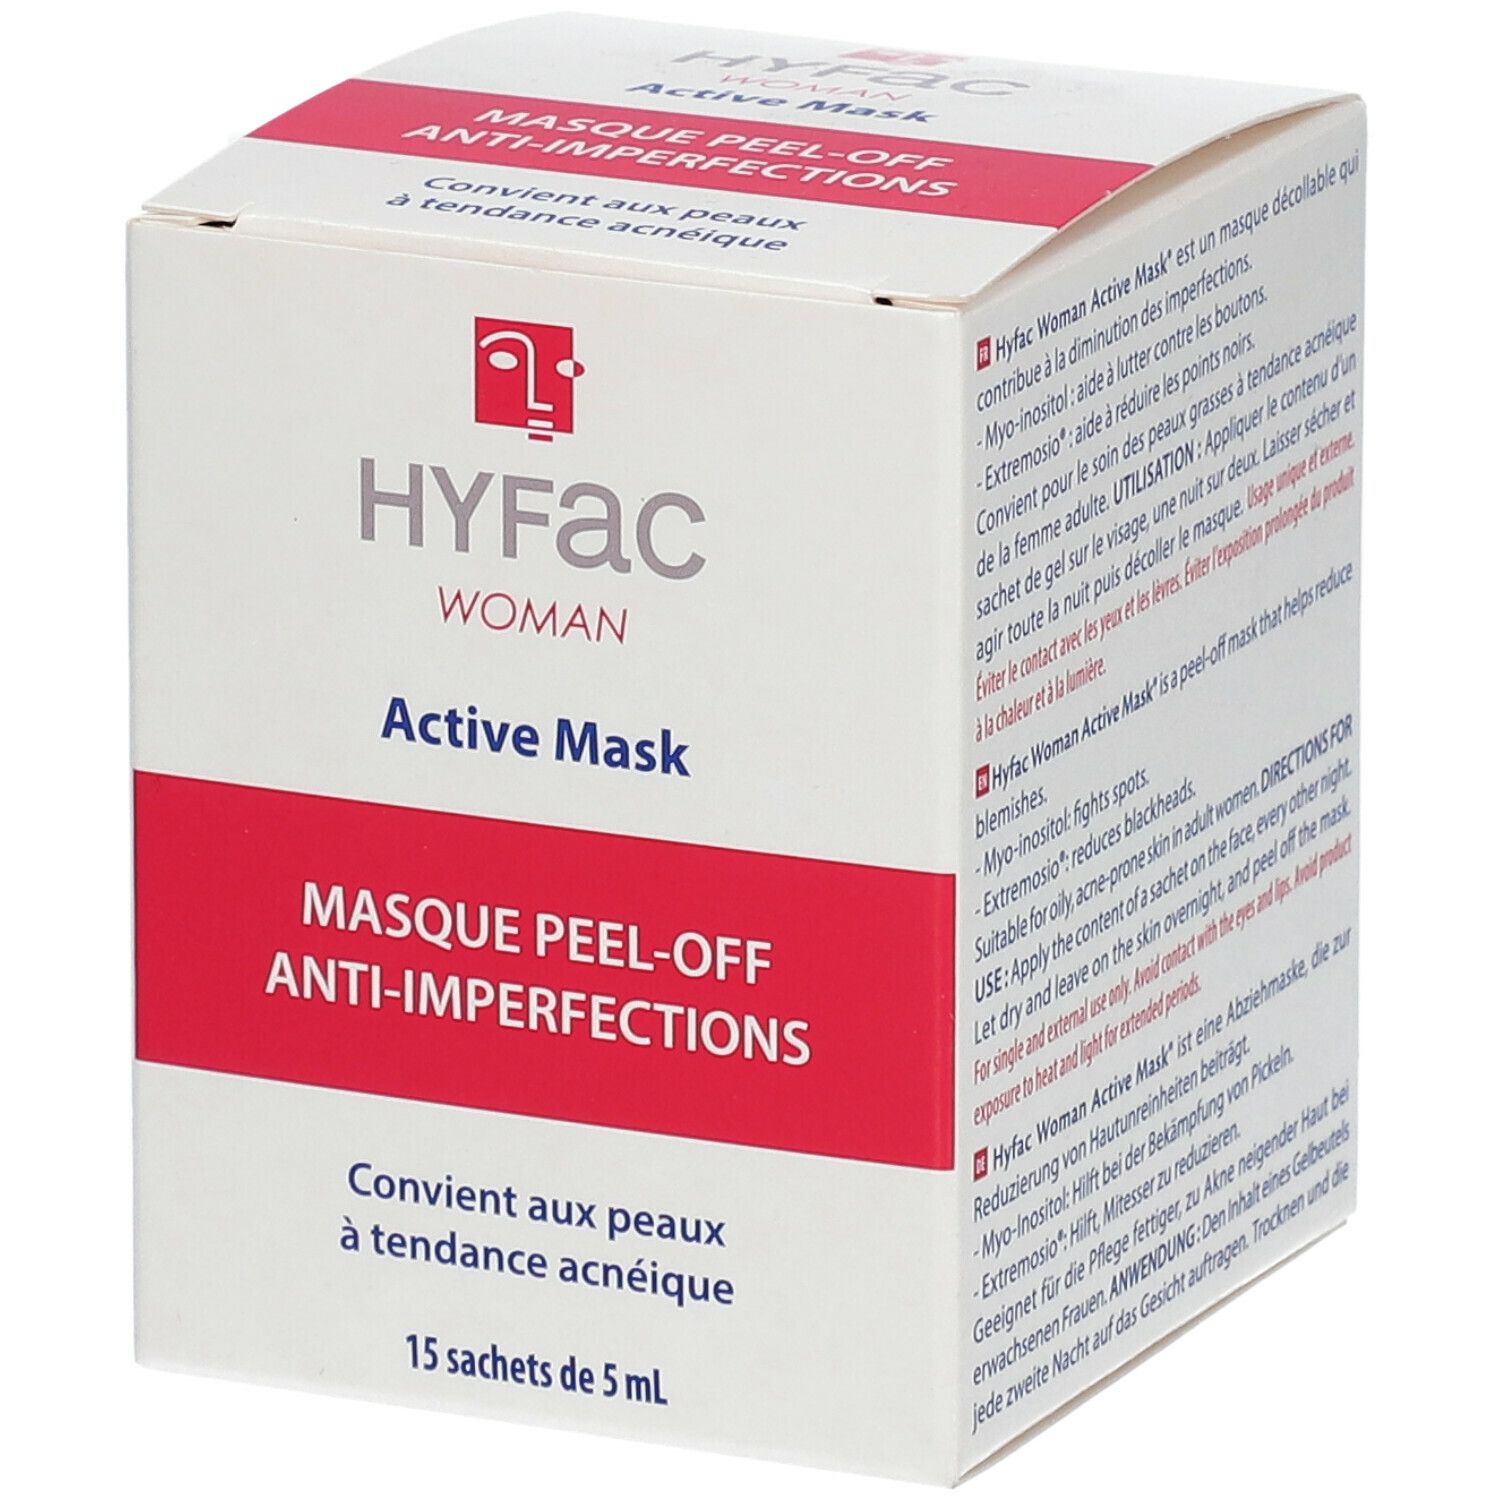 Hyfac Woman Active Mask